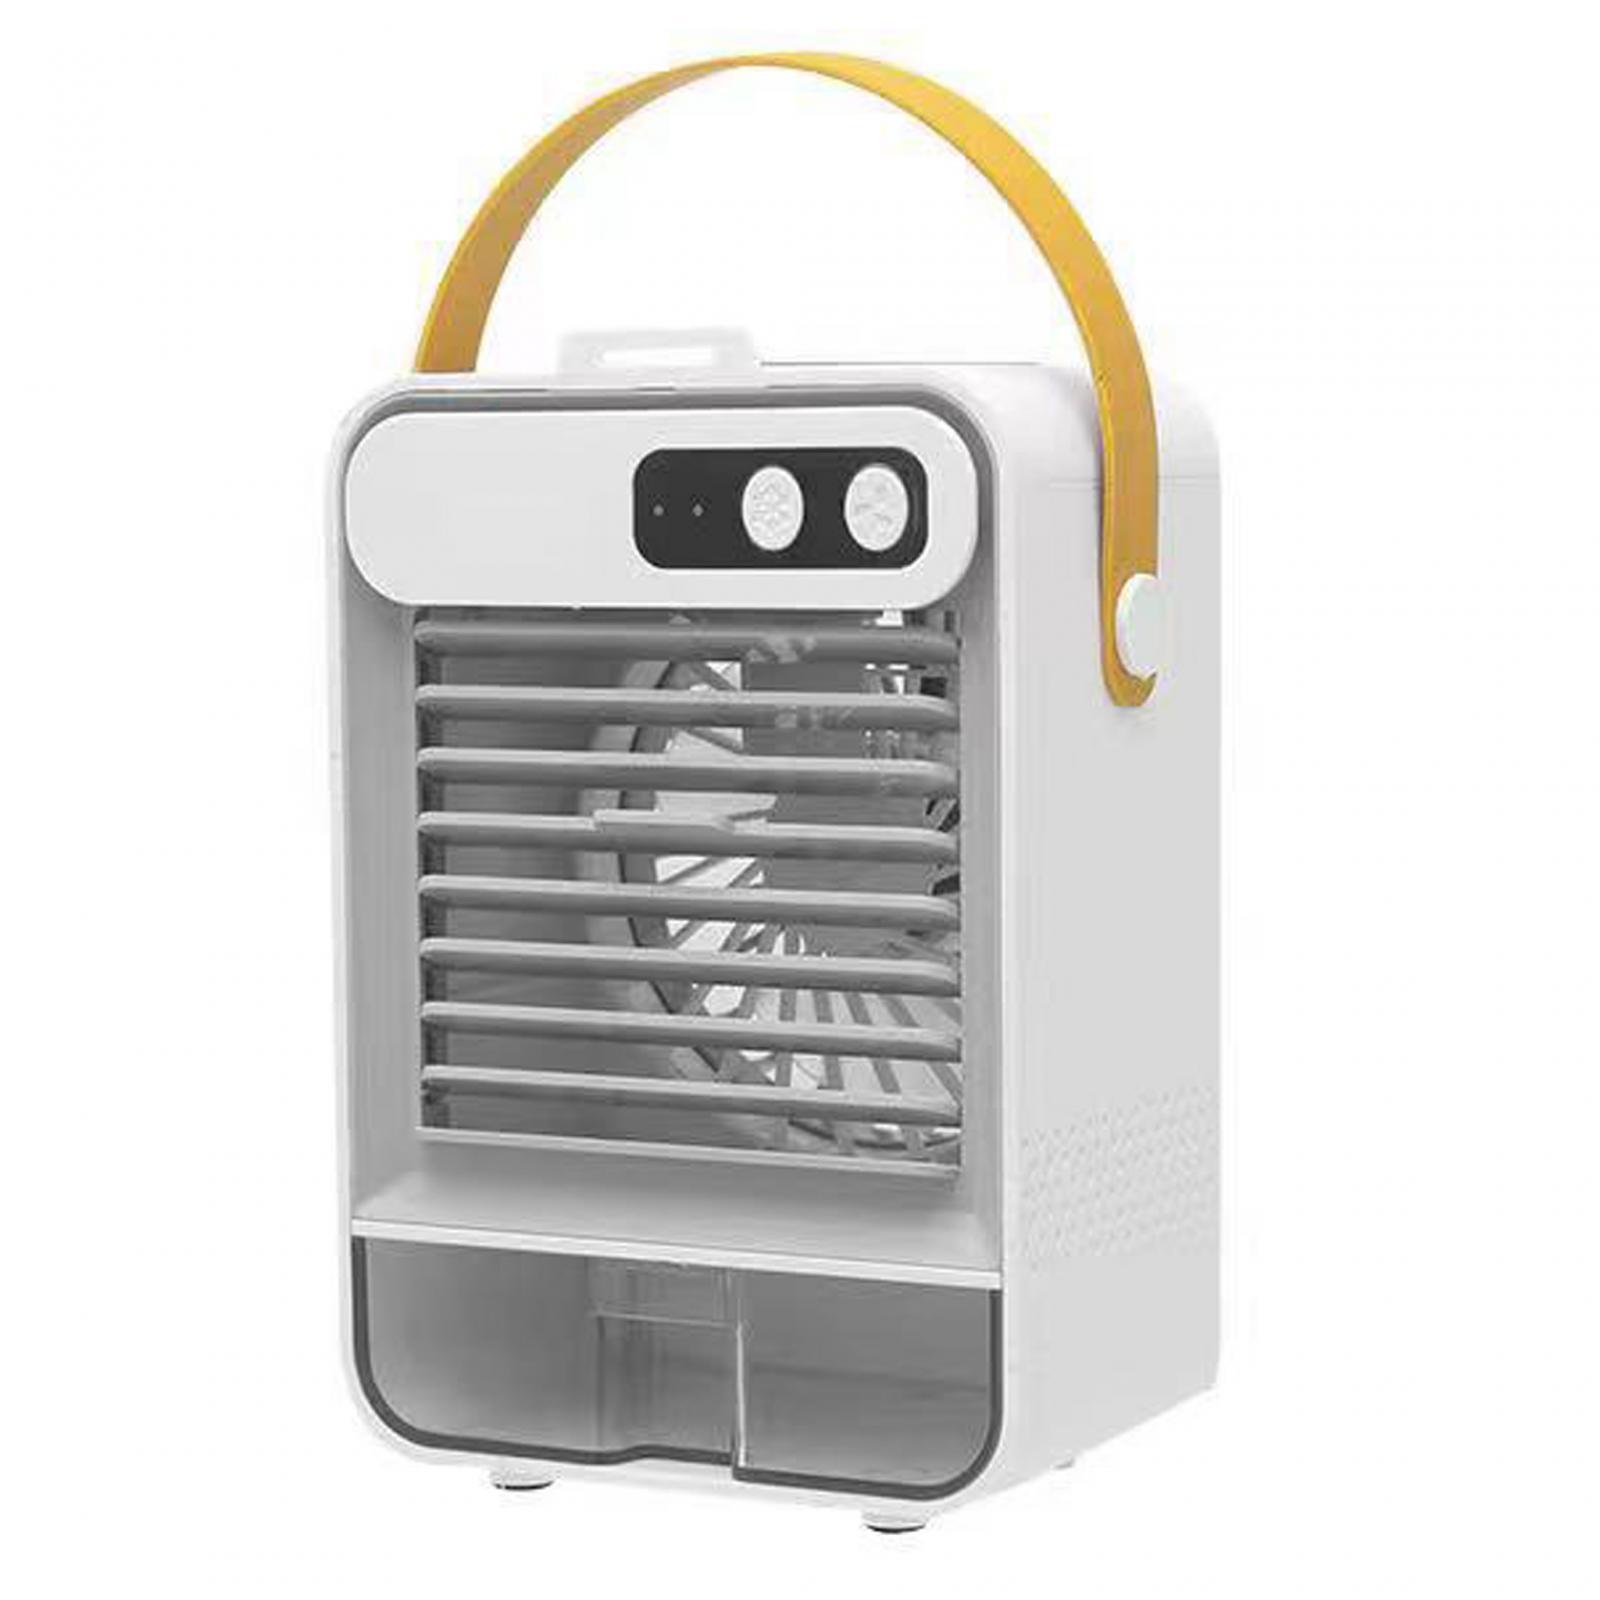 Portable Air Conditioner Garden Picnic Office Kitchen Cooling - White